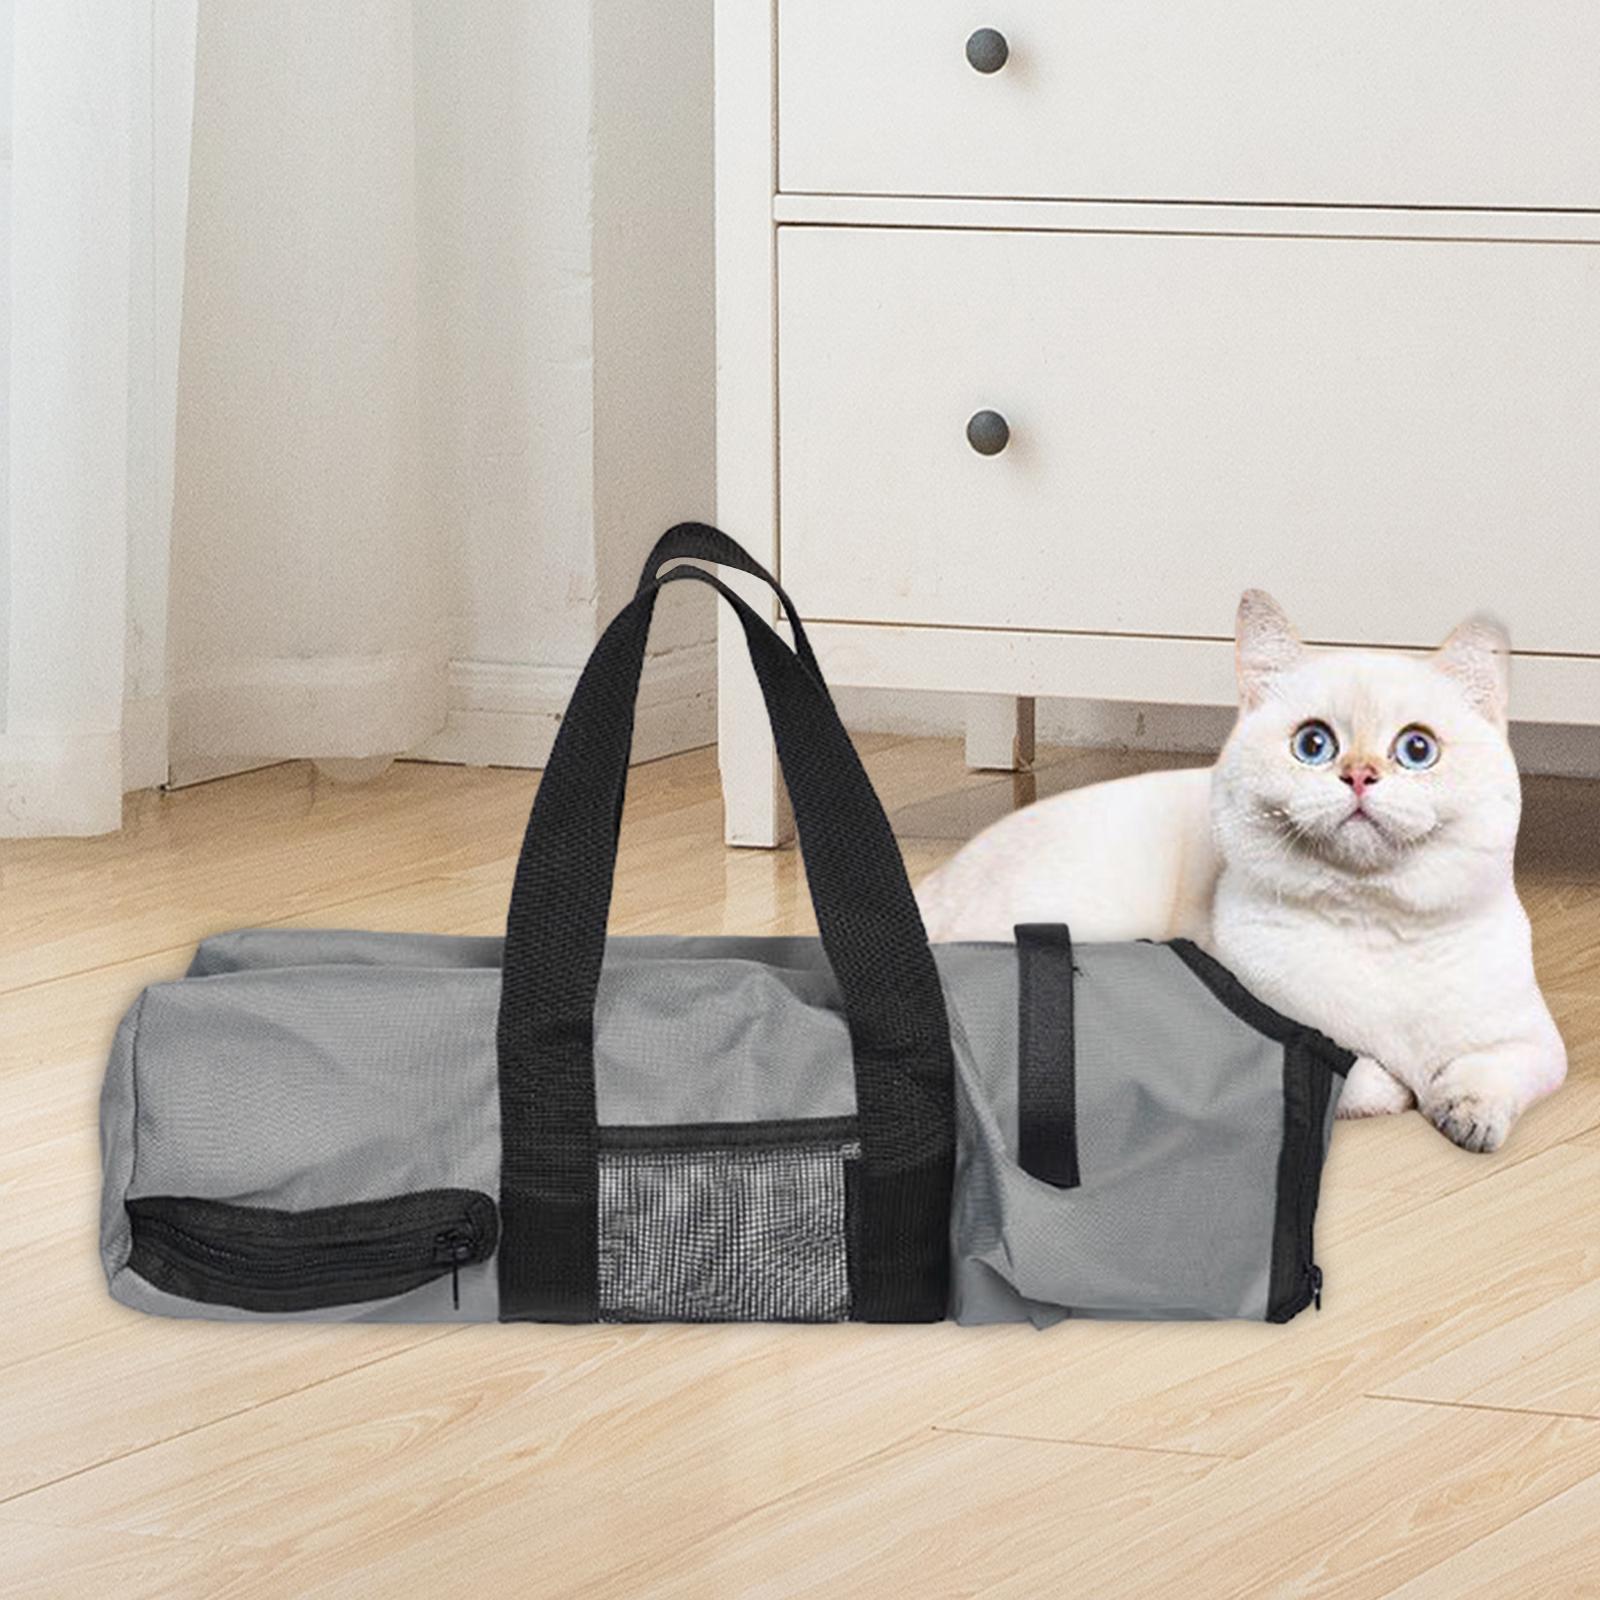 Aimishion Soft Sided Pet Travel Carrier for Small Medium Cats Comfortable